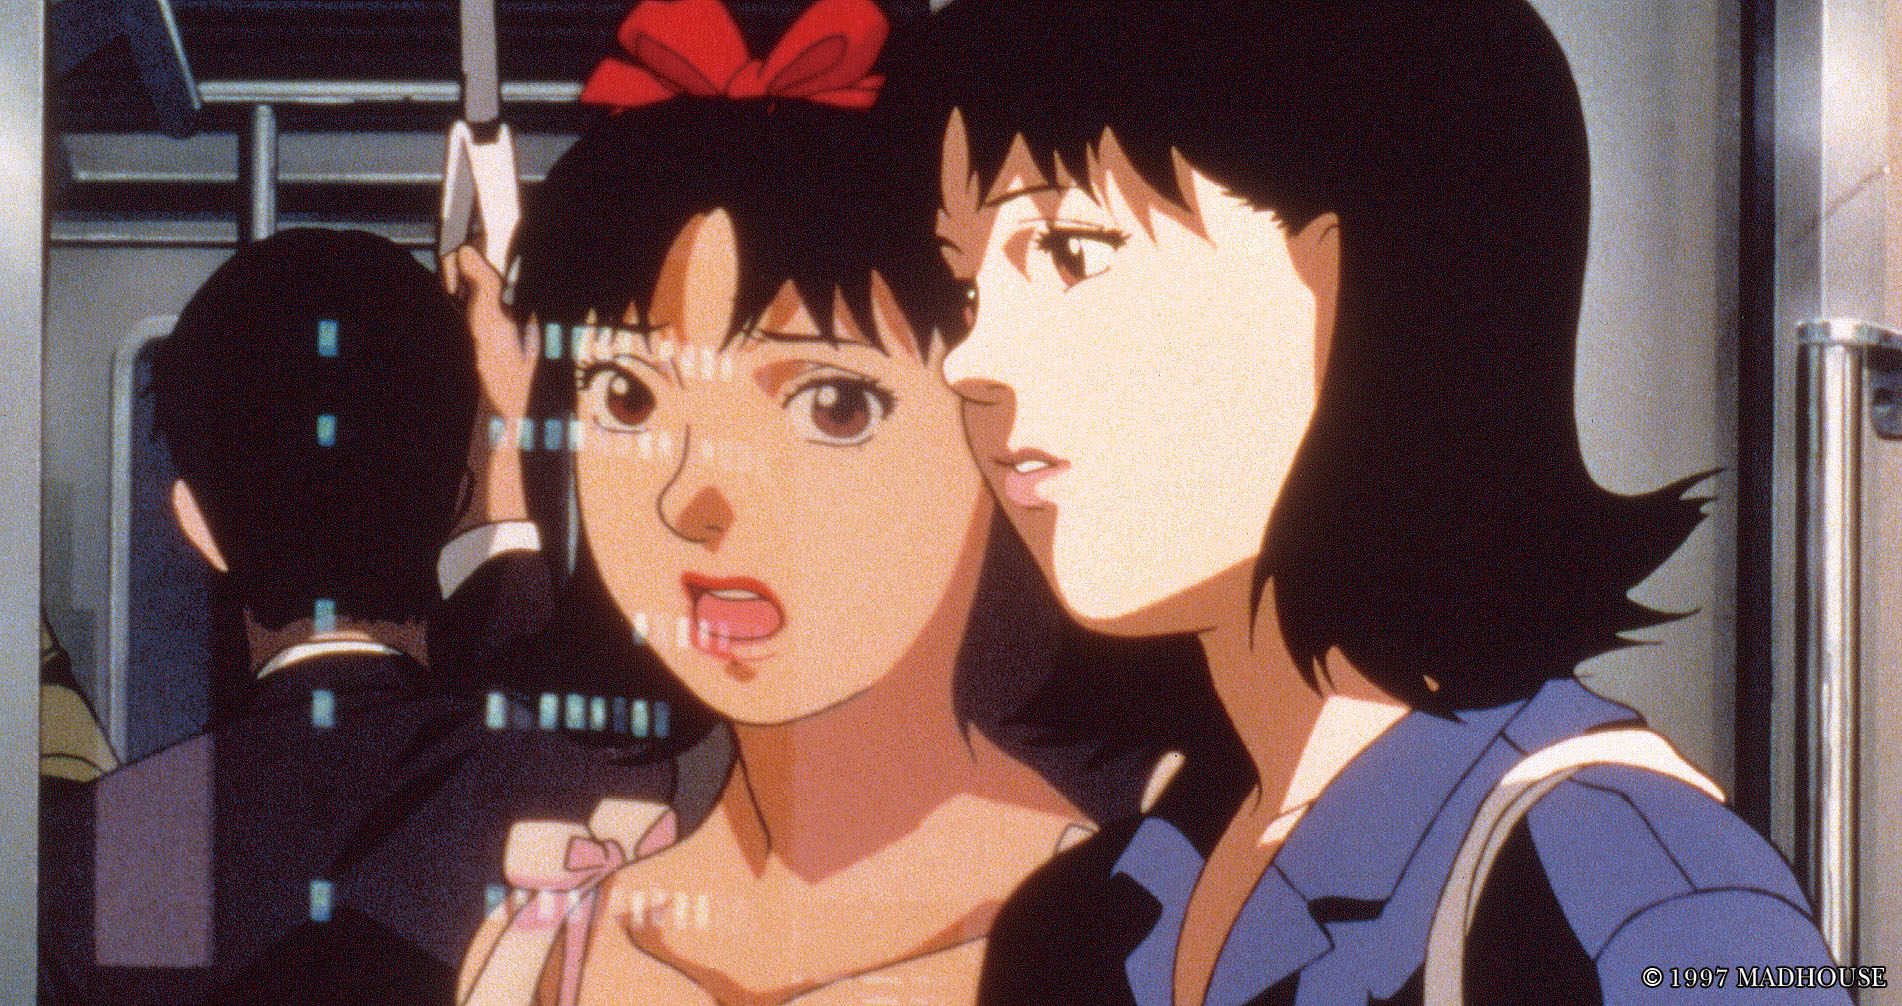 A still from “Perfect Blue”.